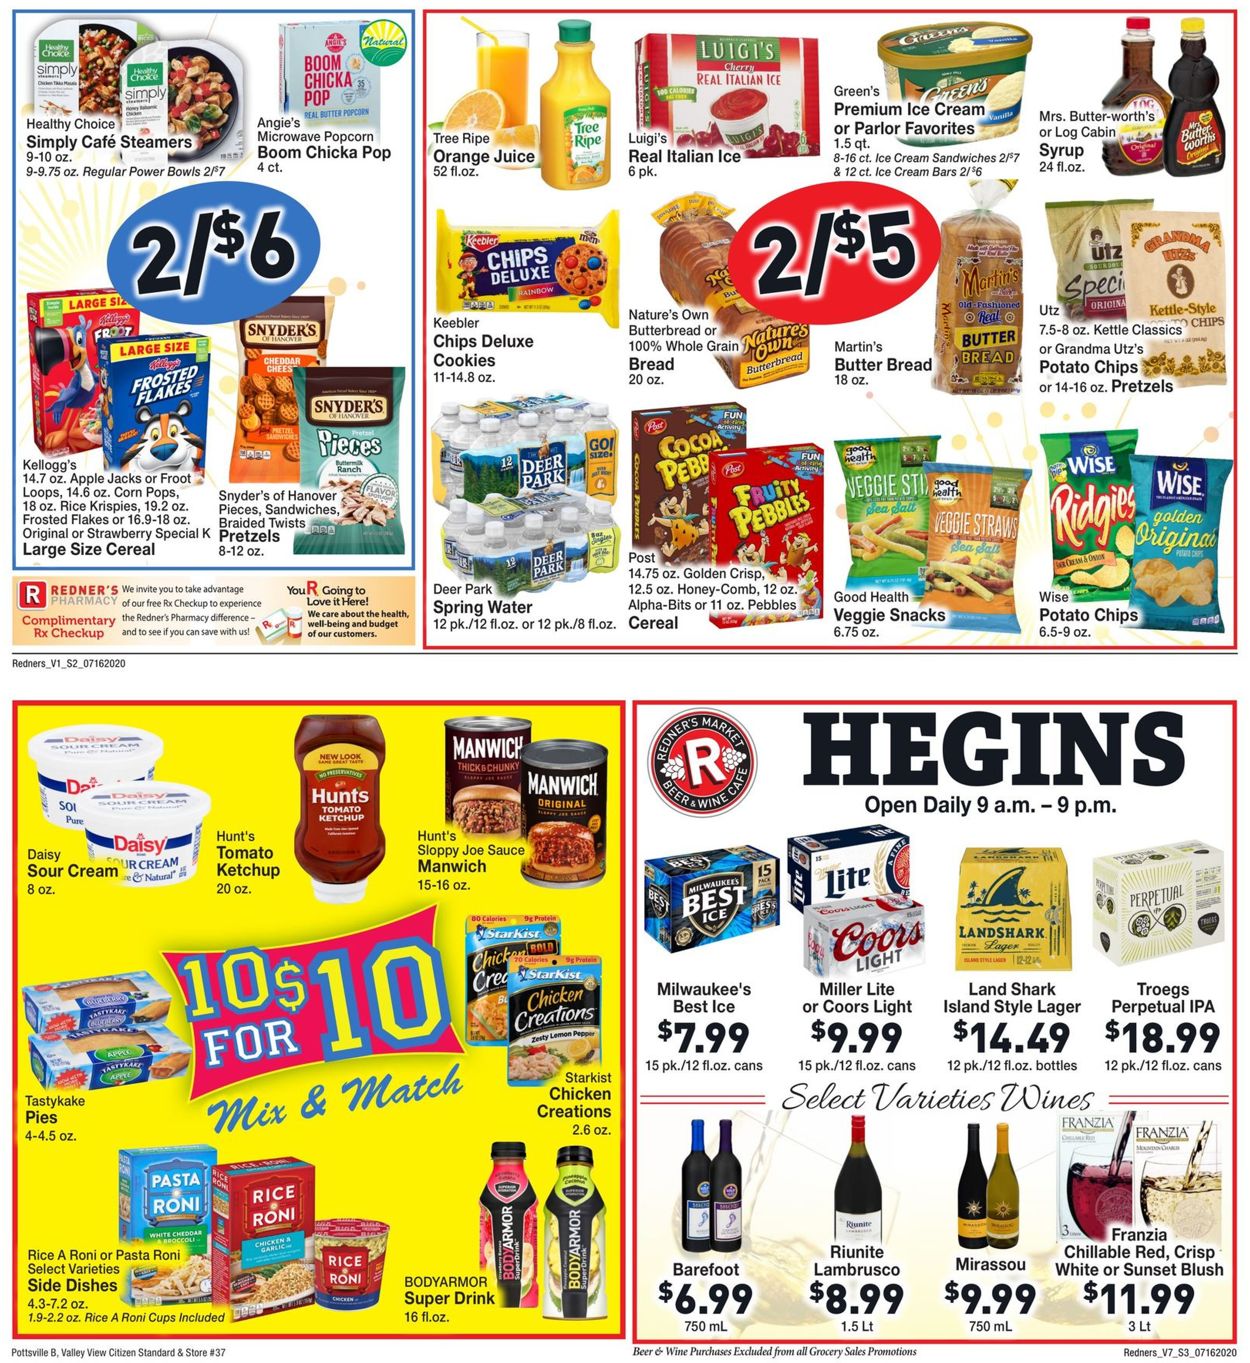 Catalogue Redner’s Warehouse Market from 07/16/2020